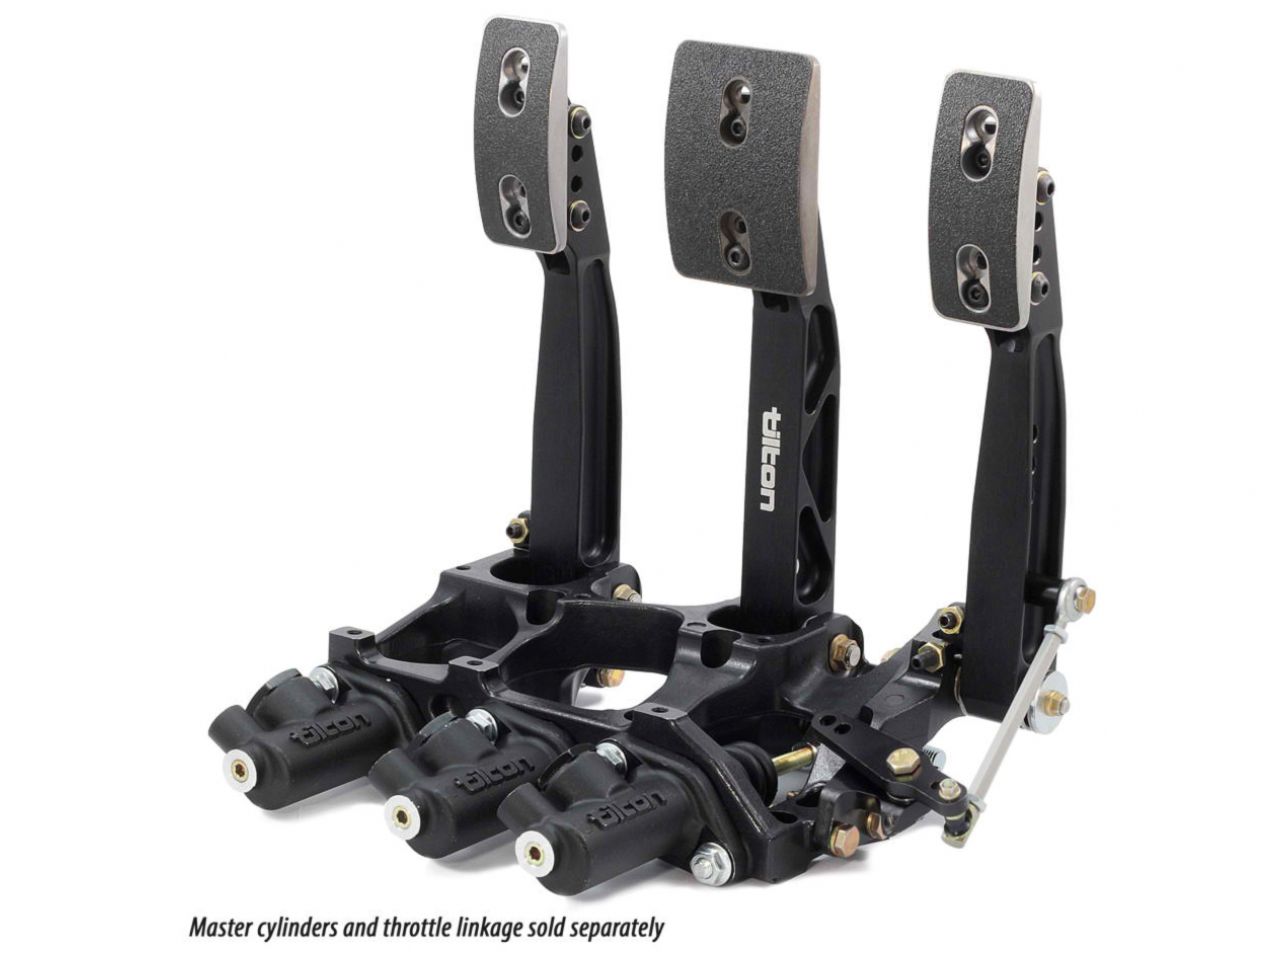 Tilton Engineering 600-Series 3-Pedal Underfoot Assembly